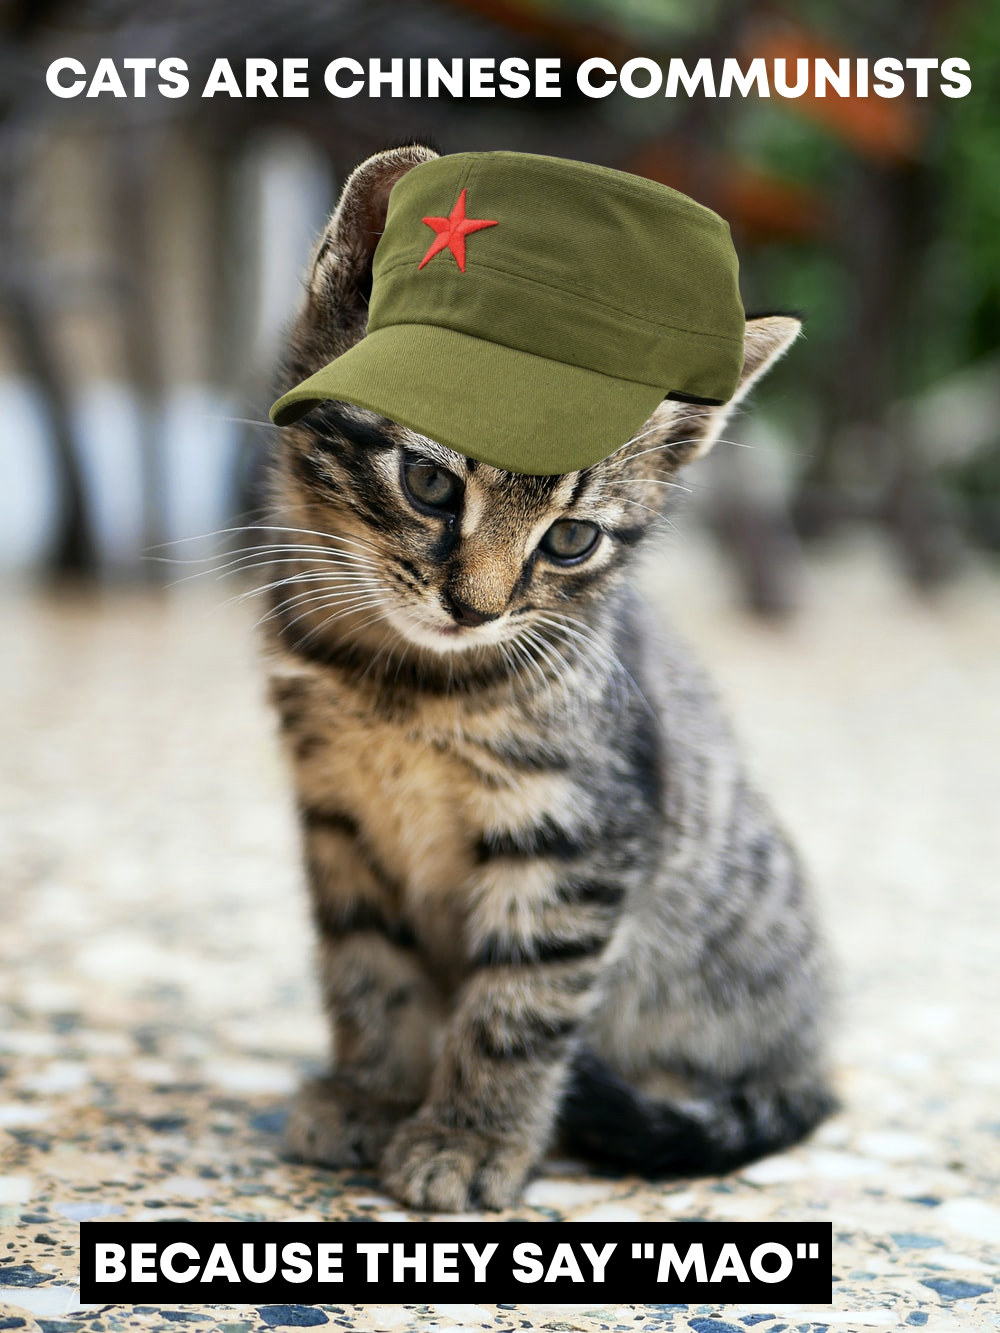 Cats are communists...